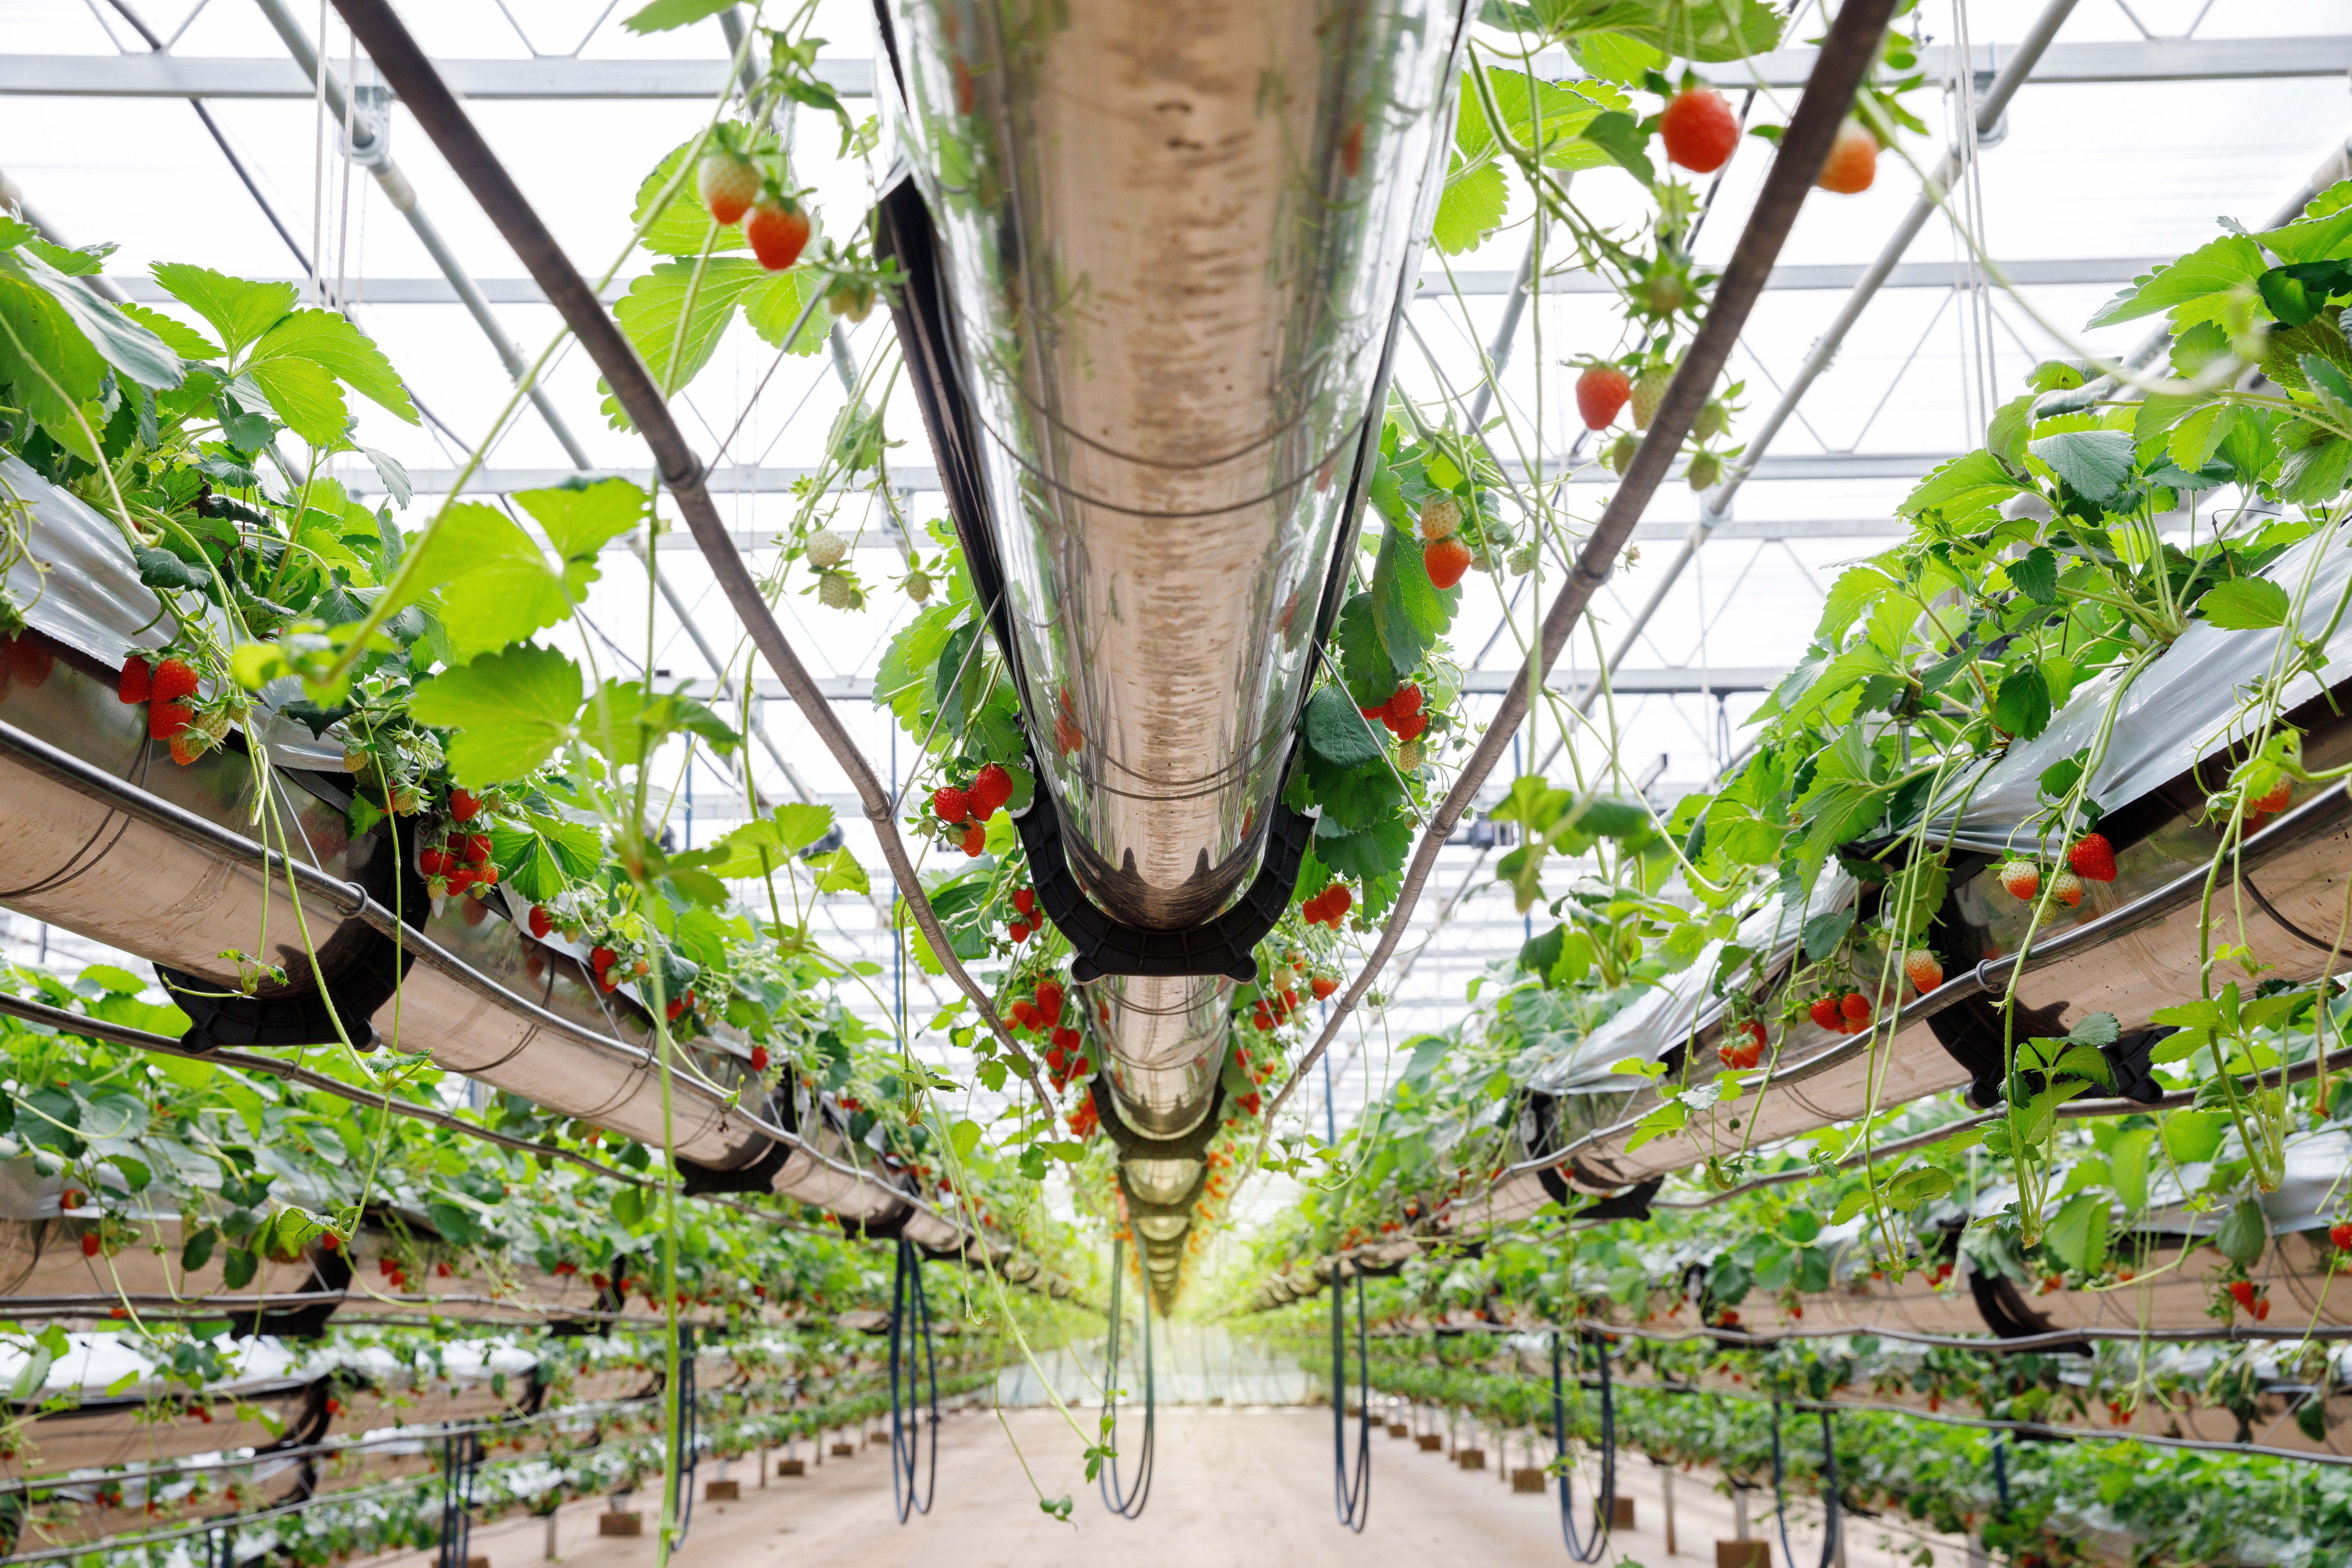 Inside a hydroponic greenhouse growing strawberries